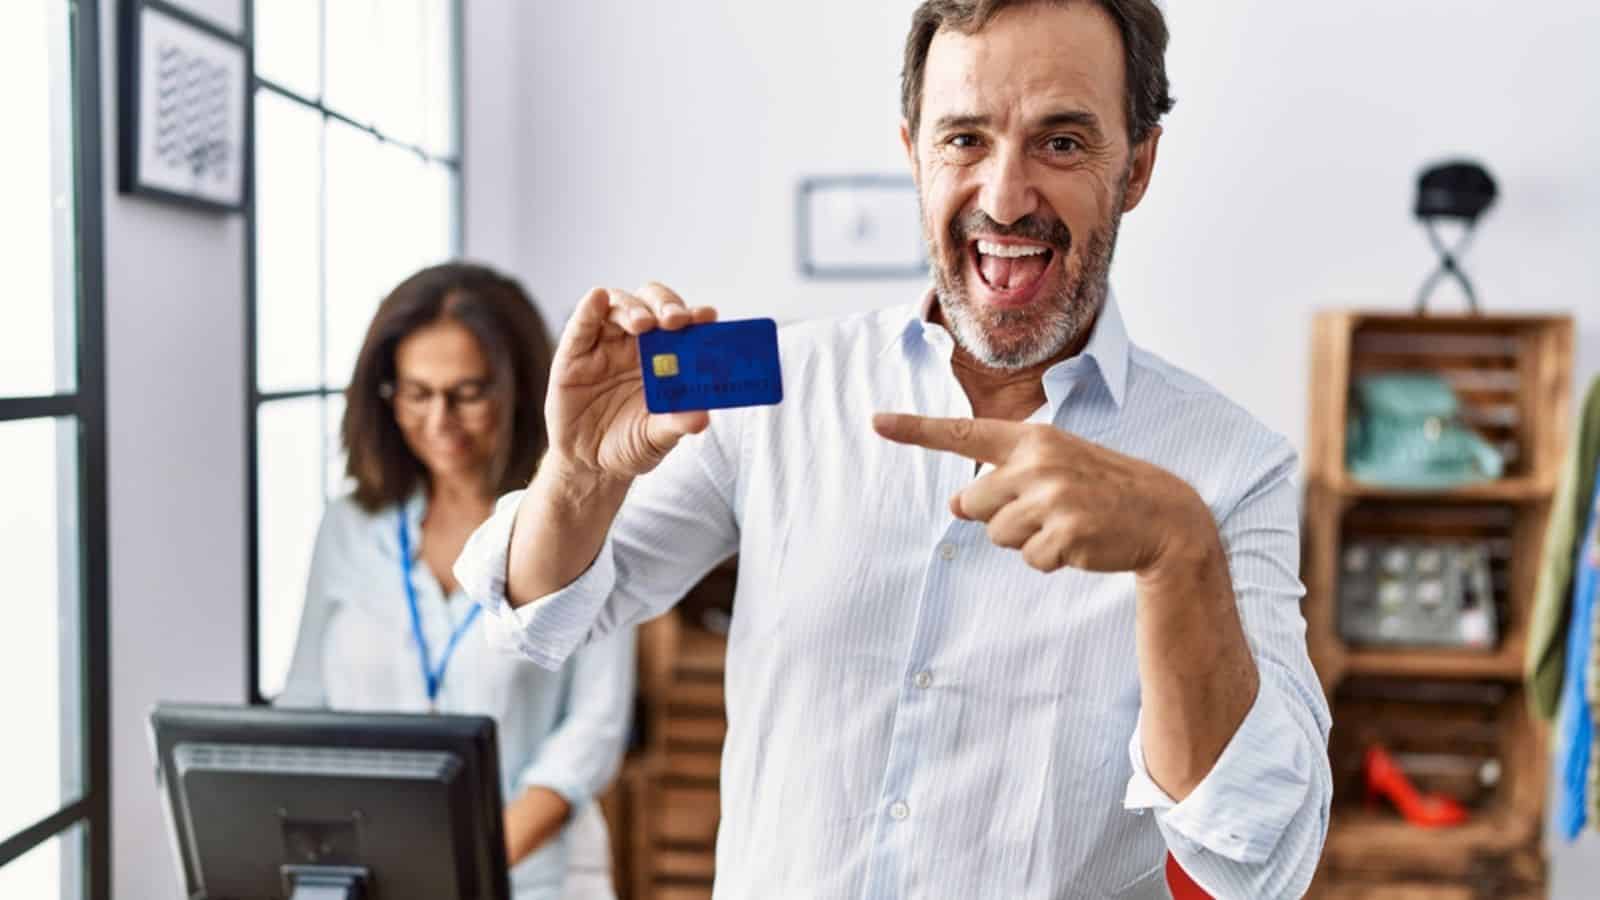 Hispanic man holding credit card at retail shop smiling happy pointing with hand finger